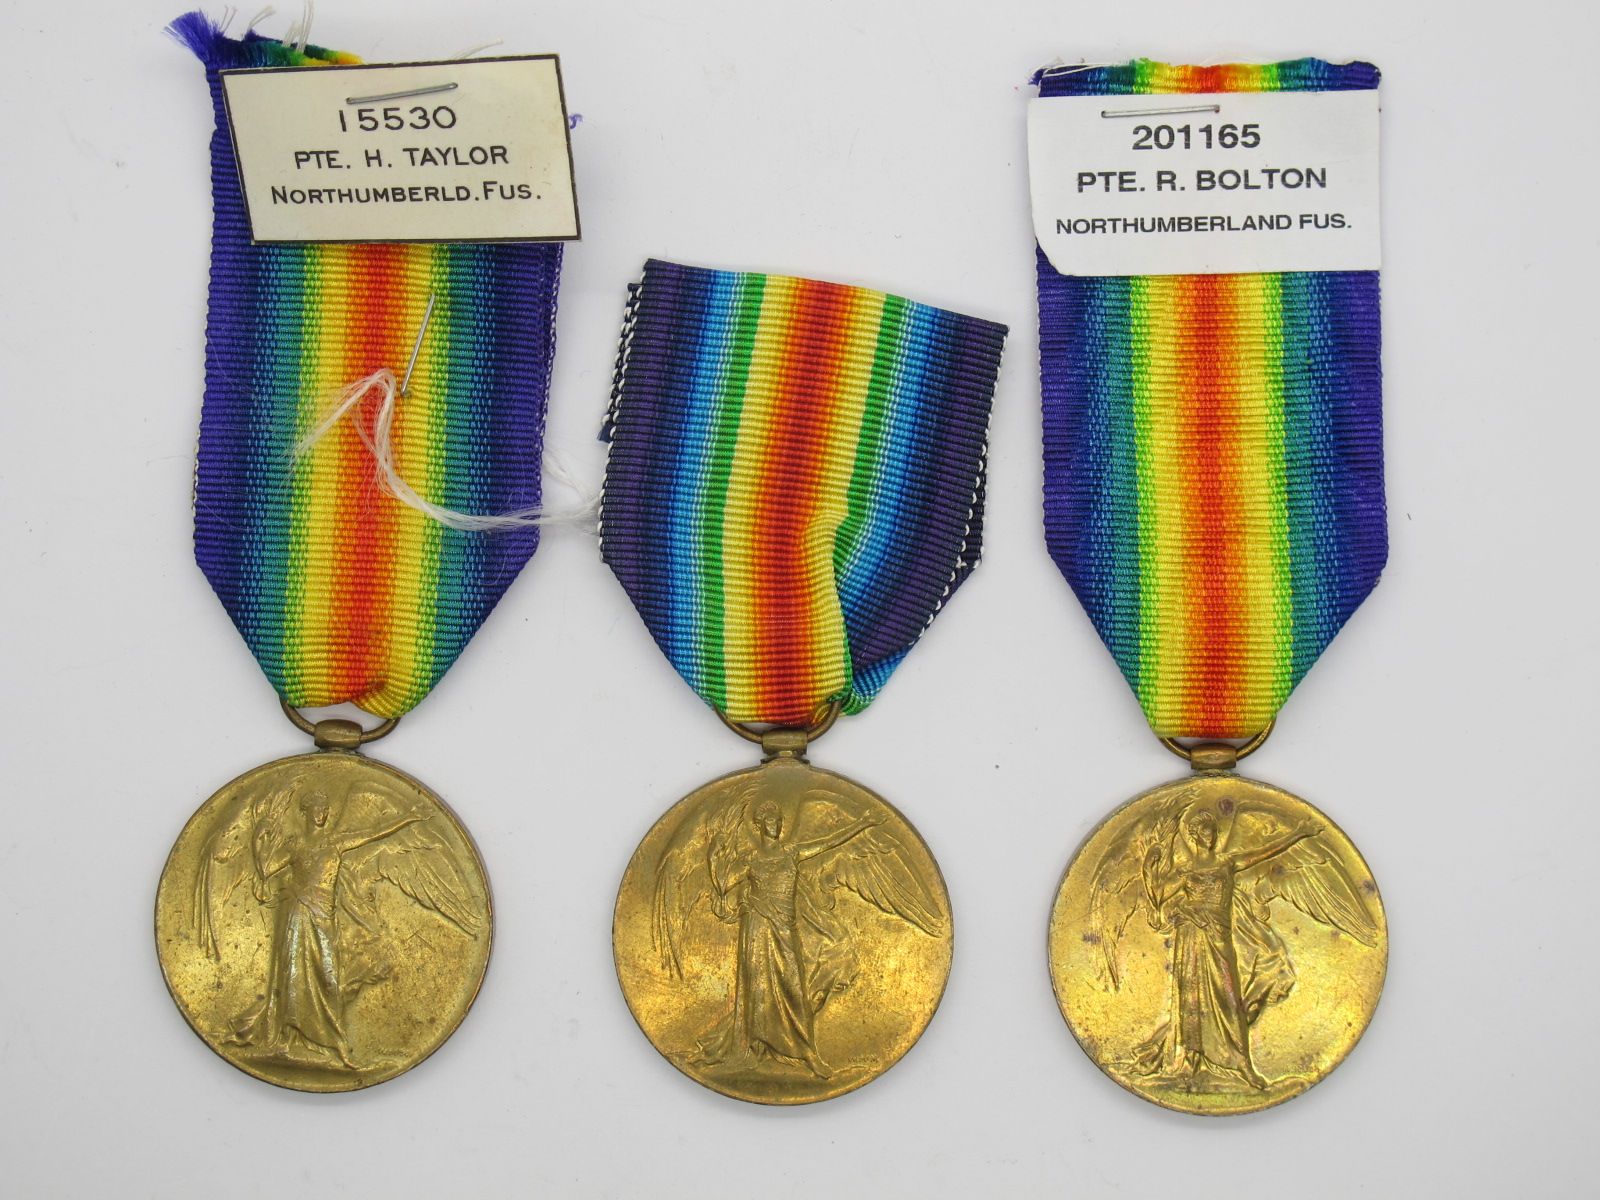 Three WWI Victory Medals, to 15530 private H. Taylor Northumberland Fusilier's 201165 Private R.